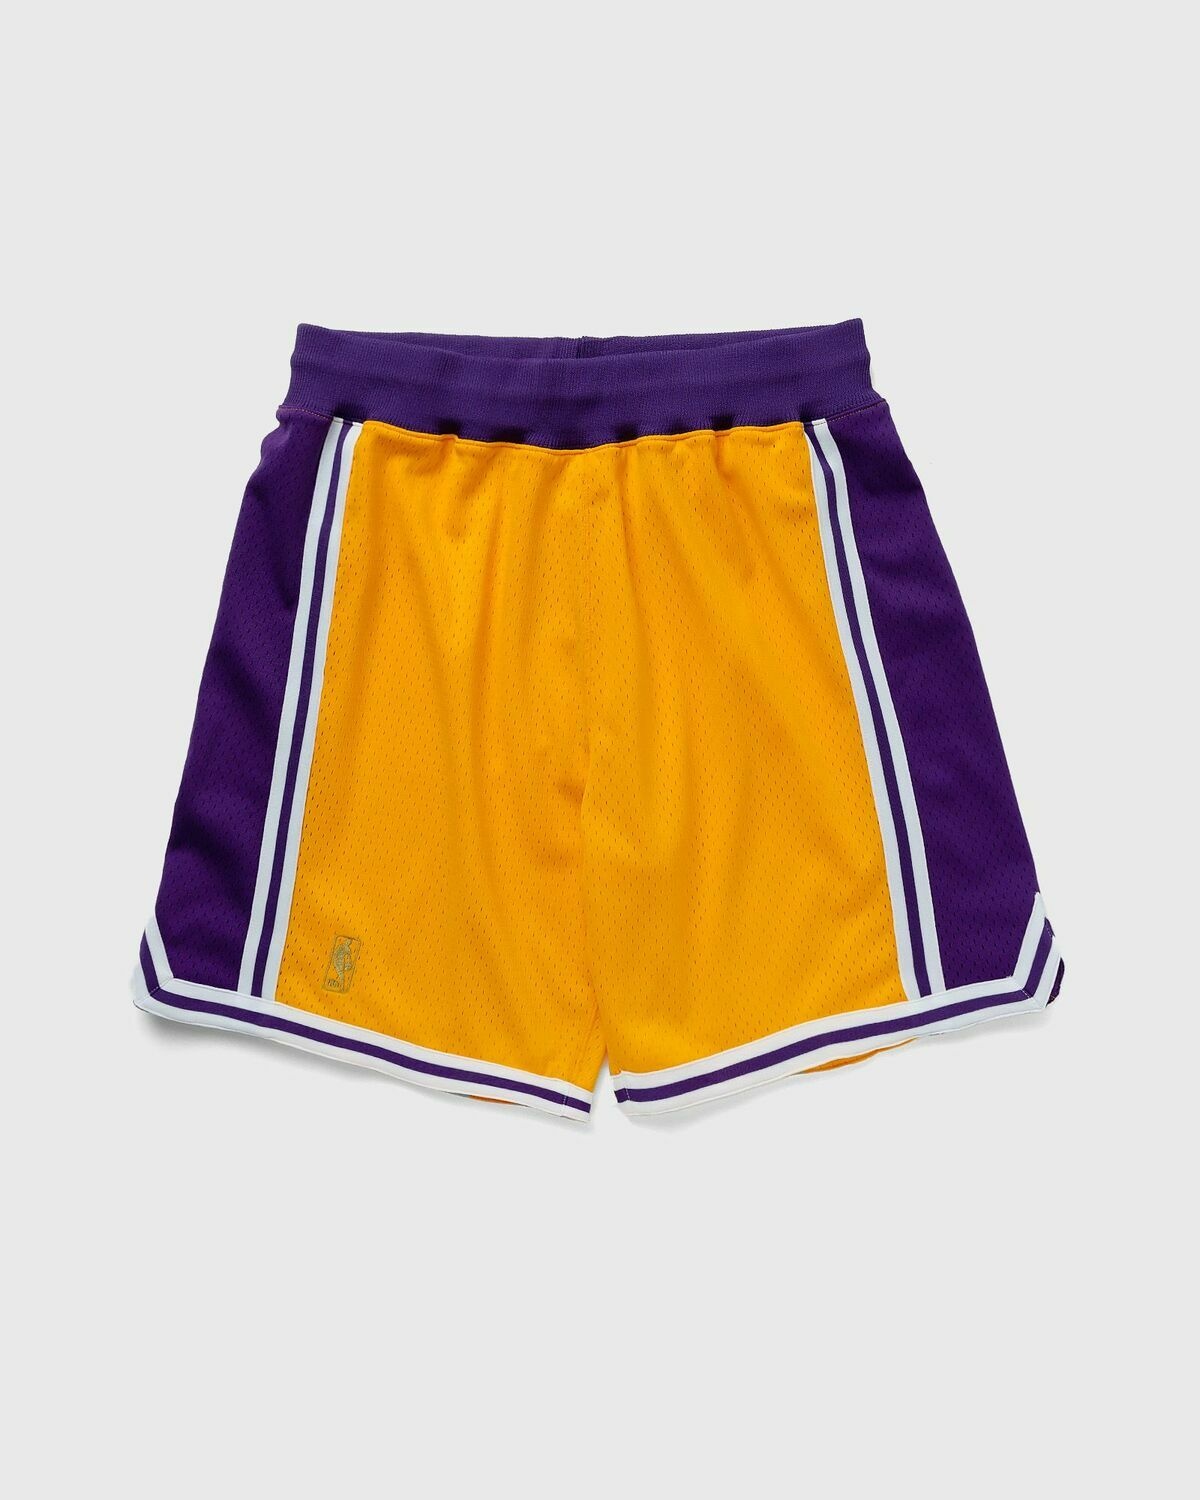 Mitchell & Ness Nba Authentic Shorts Los Angeles Lakers Home 1996 97 Yellow - Mens - Sport & Team Shorts